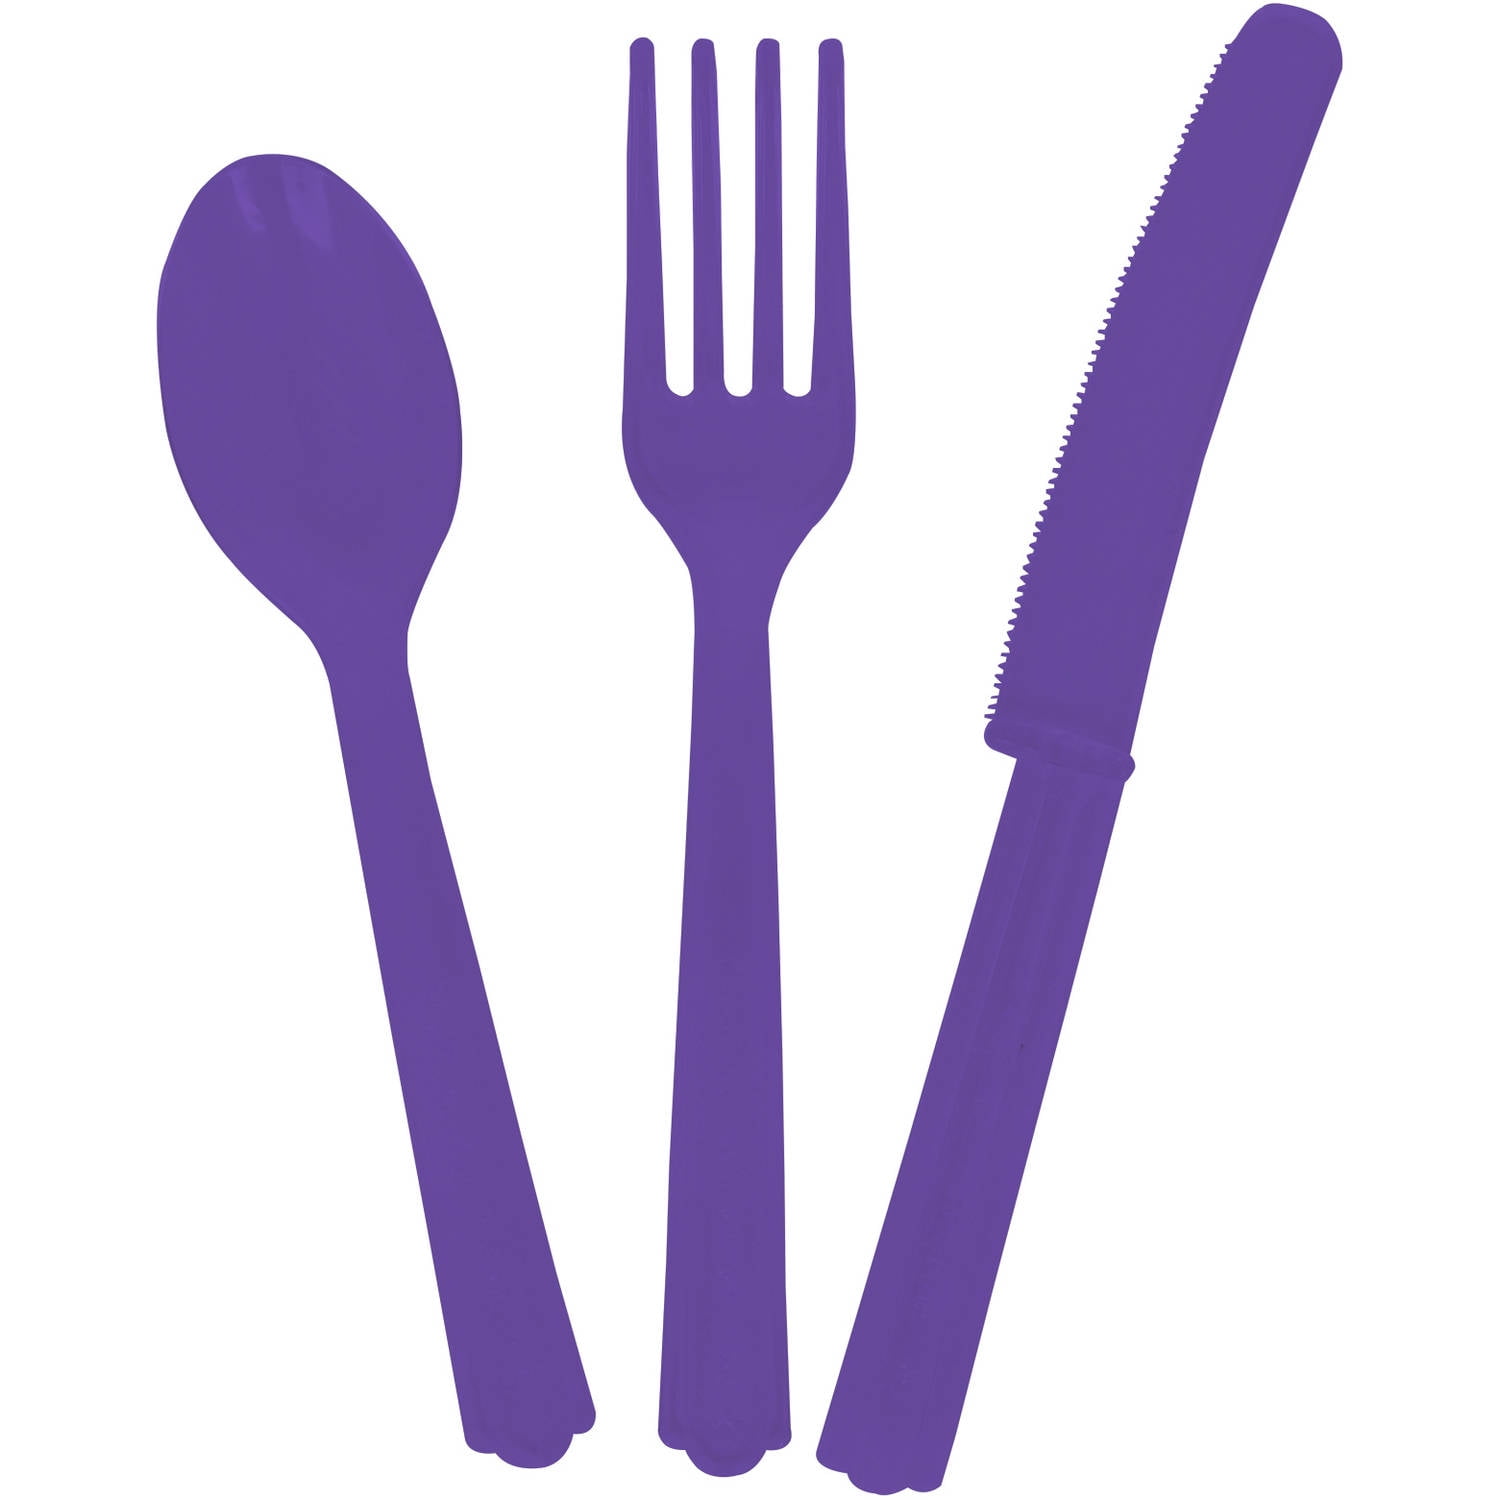 Amscan Purple Heavy-Duty Plastic Cutlery Set for 20 Guests, 80ct